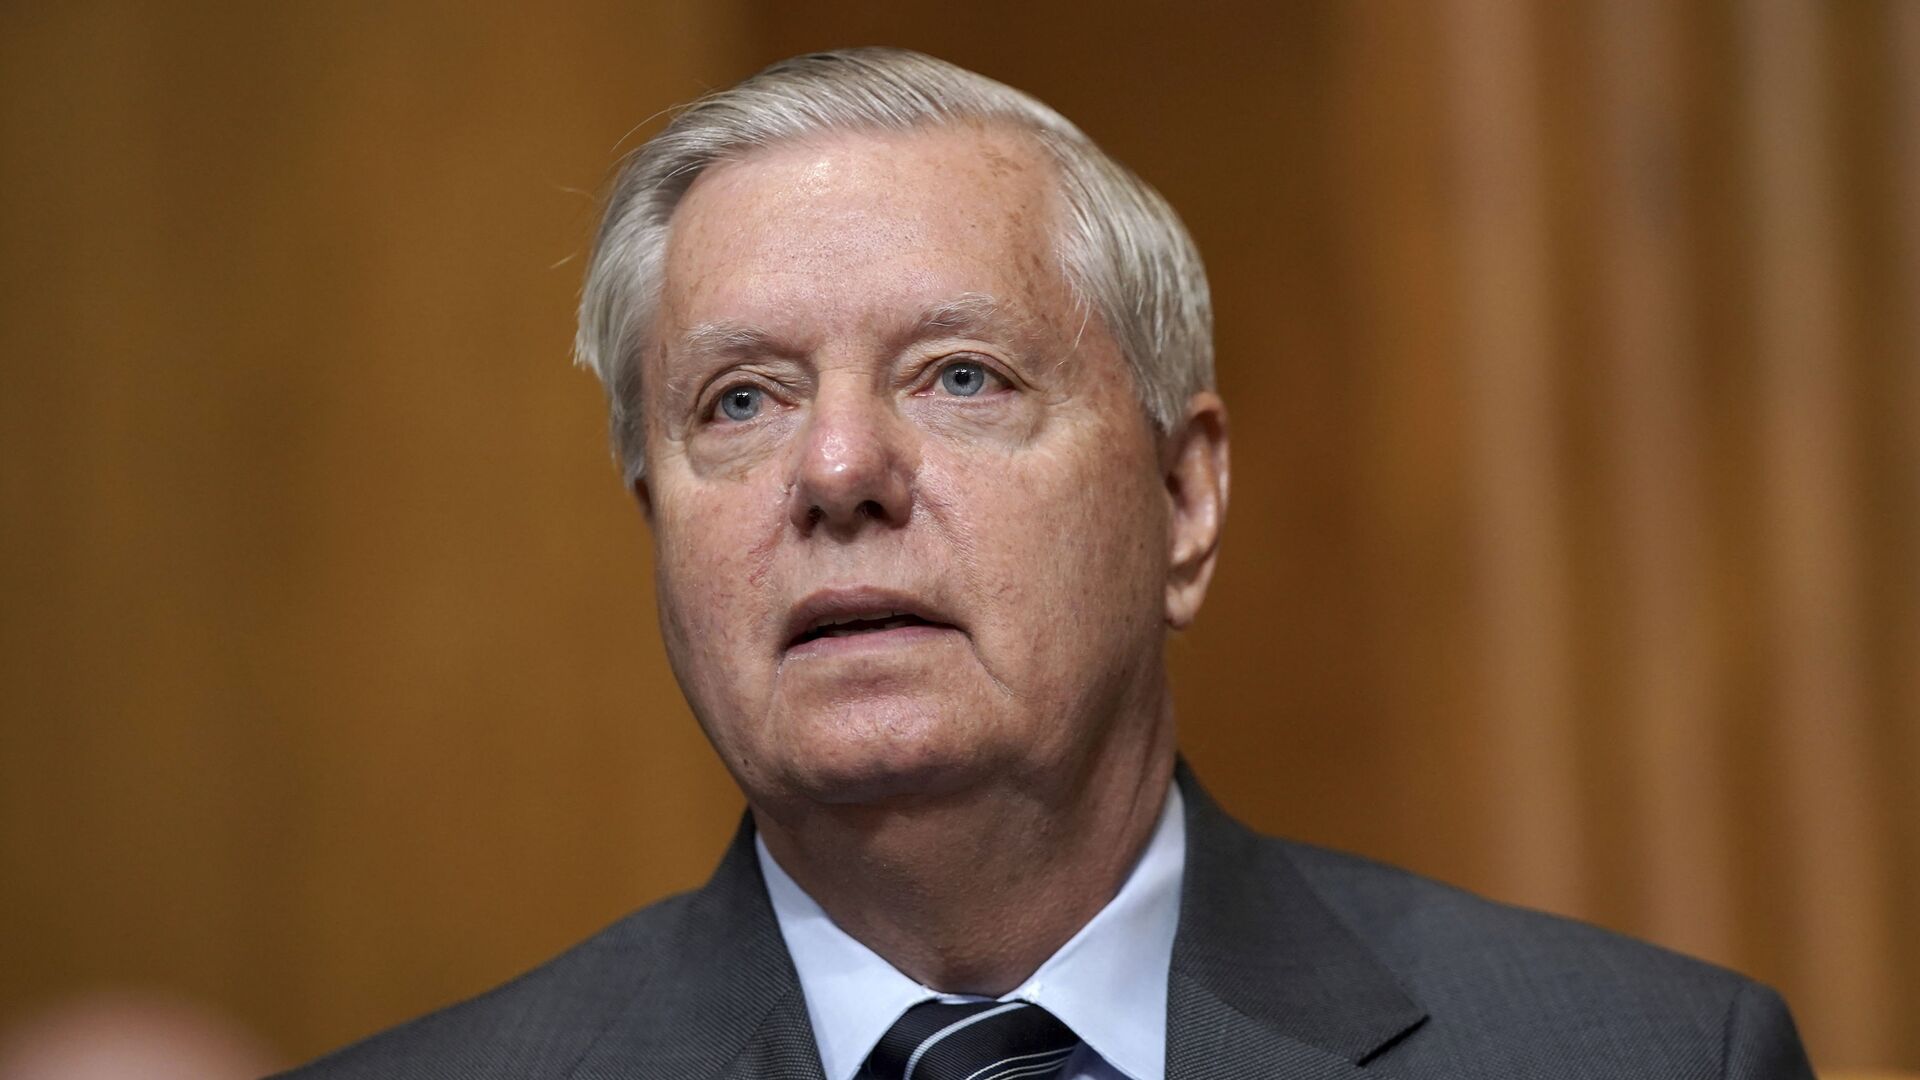 Sen. Lindsey Graham, R-SC, speaks during a Senate Budget Committee hearing to discuss President Joe Biden's budget request for FY 2022 on Tuesday, 8 June 2021, on Capitol Hill in Washington - Sputnik International, 1920, 19.07.2021